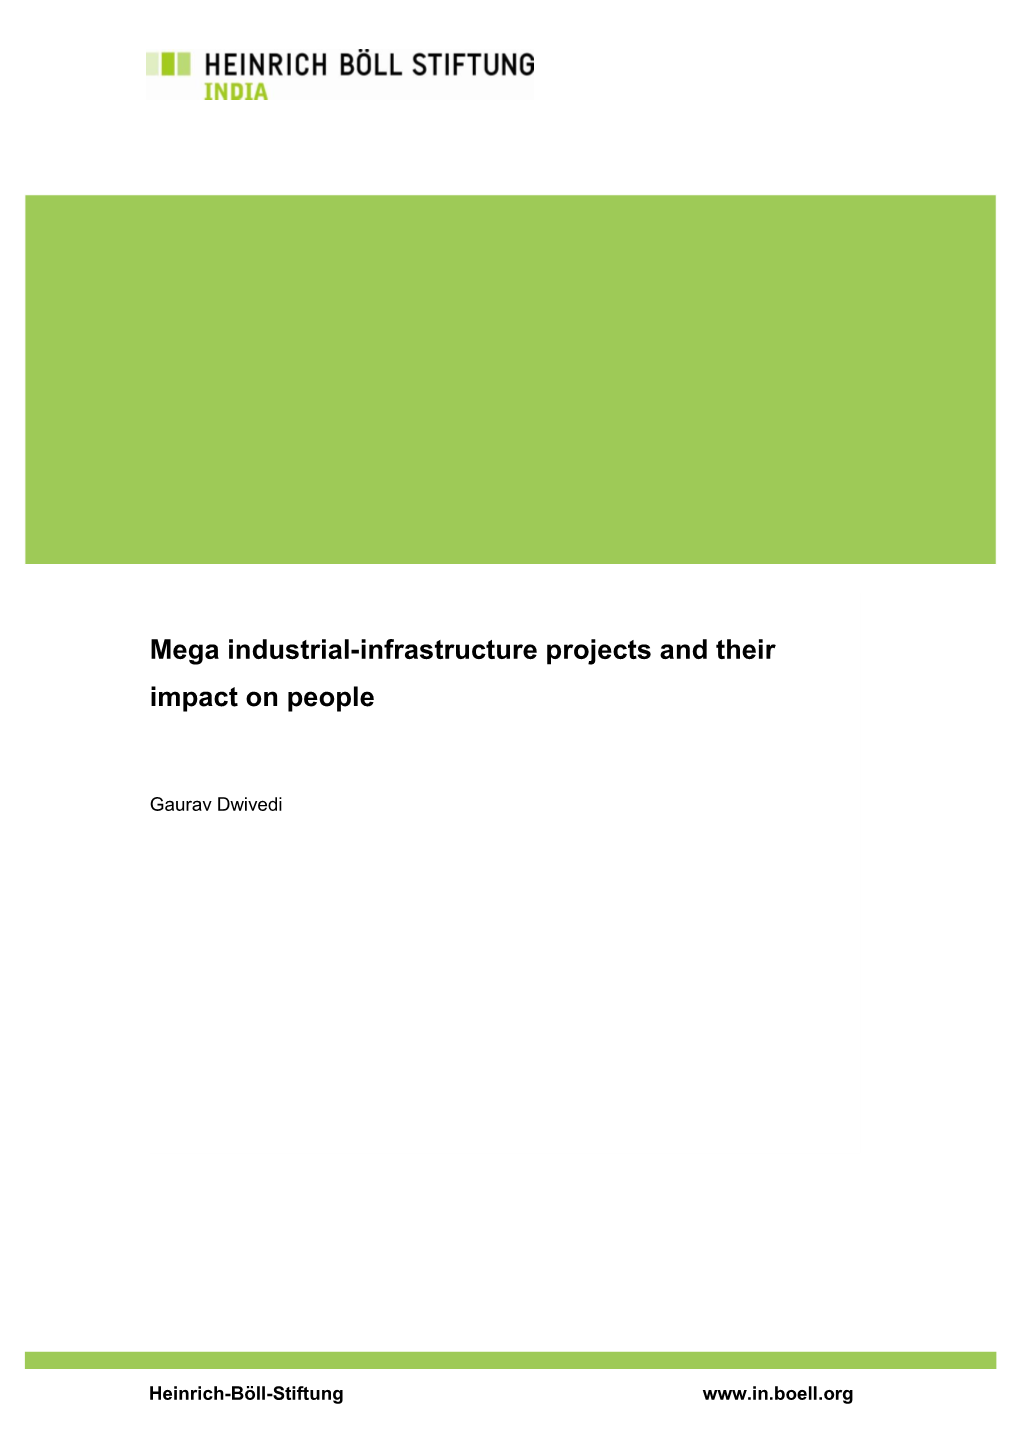 Mega Industrial-Infrastructure Projects and Their Impact on People